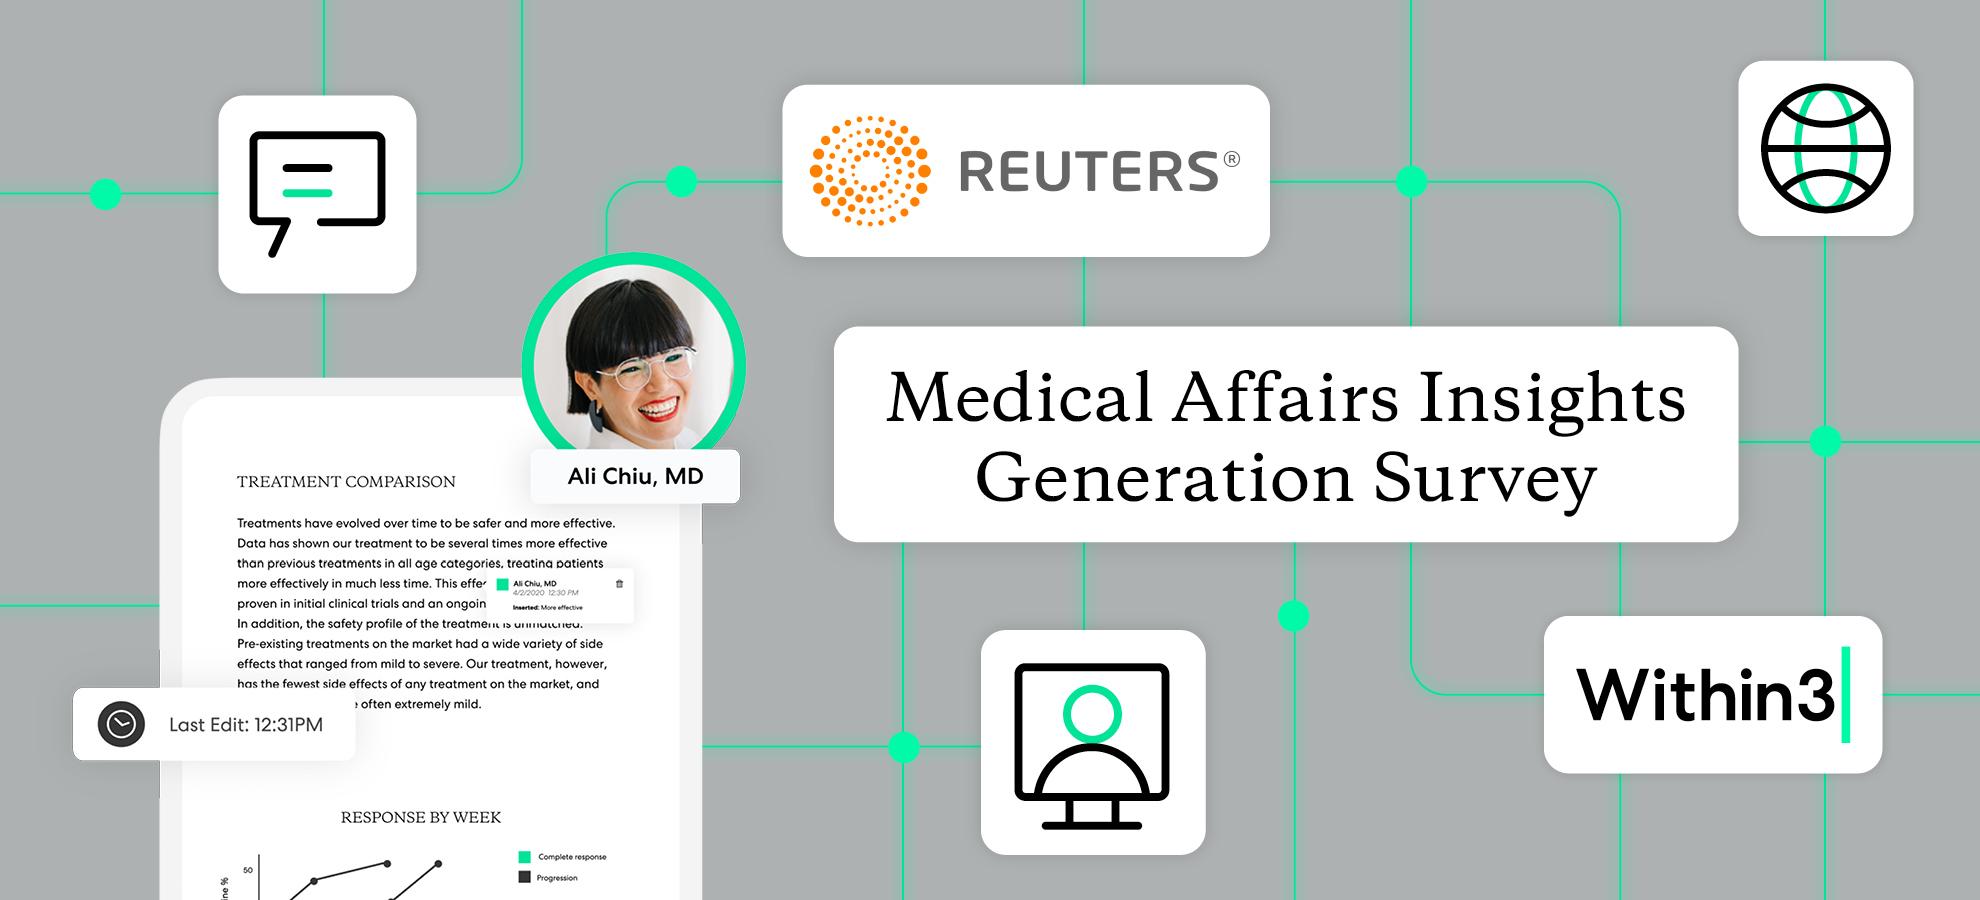 Survey indicates a seismic shift in engagement, insight generation for medical affairs